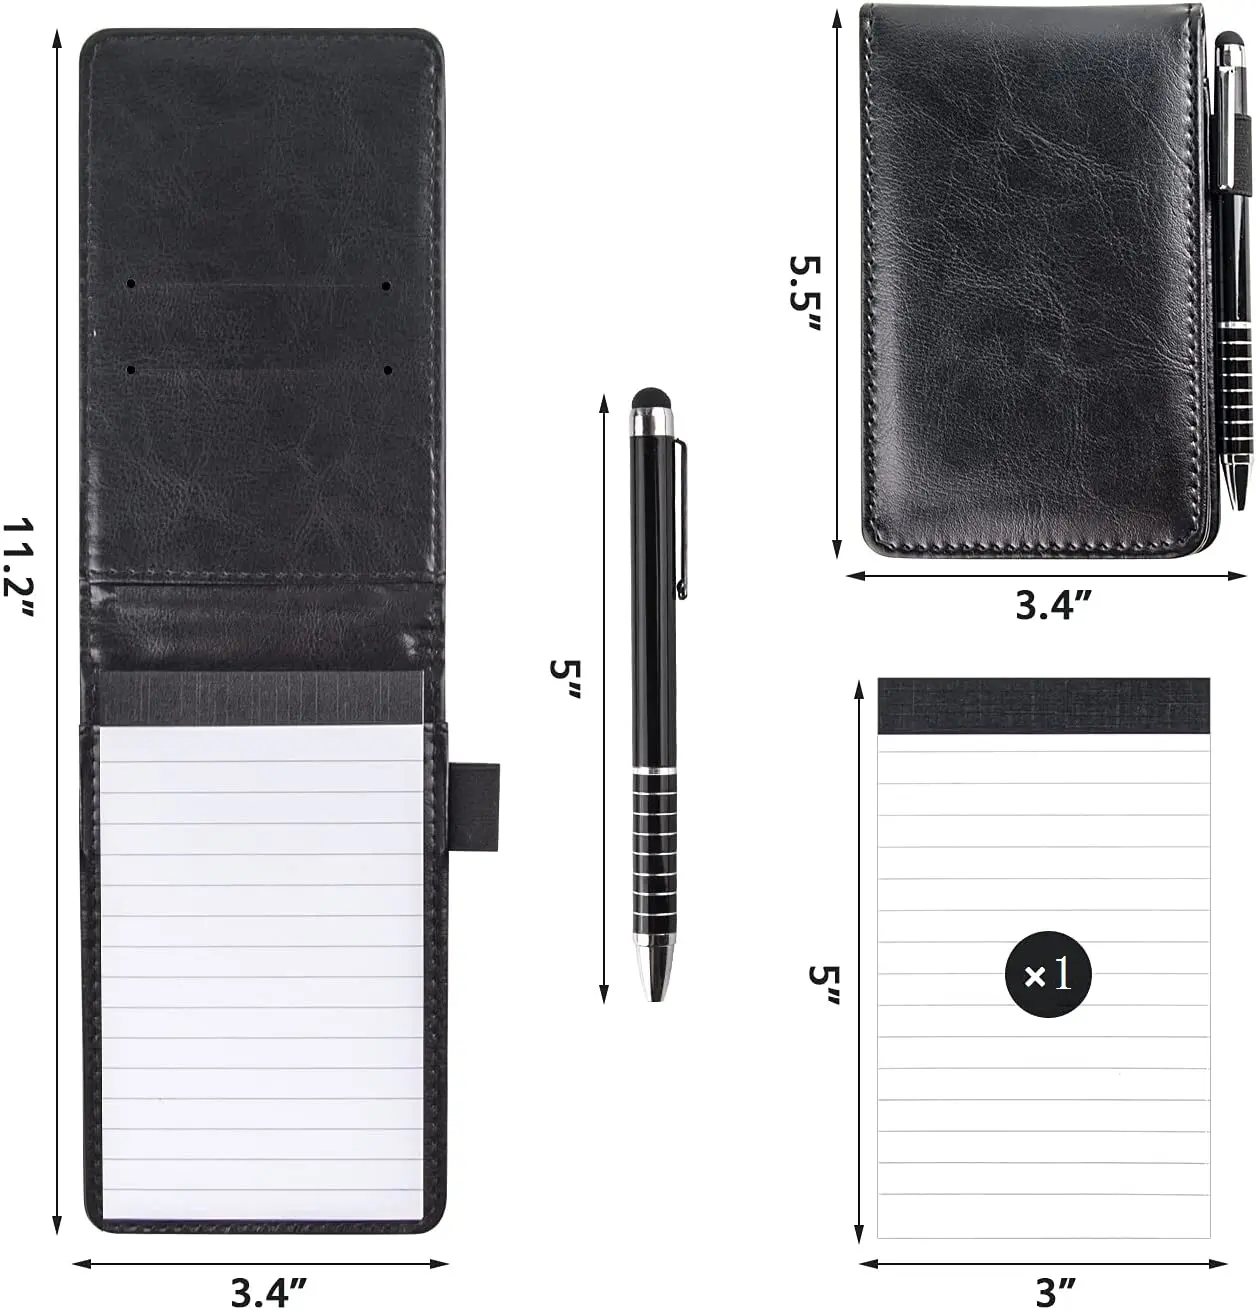 A7 PU Leather Cover Notebook Mini Pocket Notepad with Pen, Replaceable Writing Pad, 50 Lined Sheets